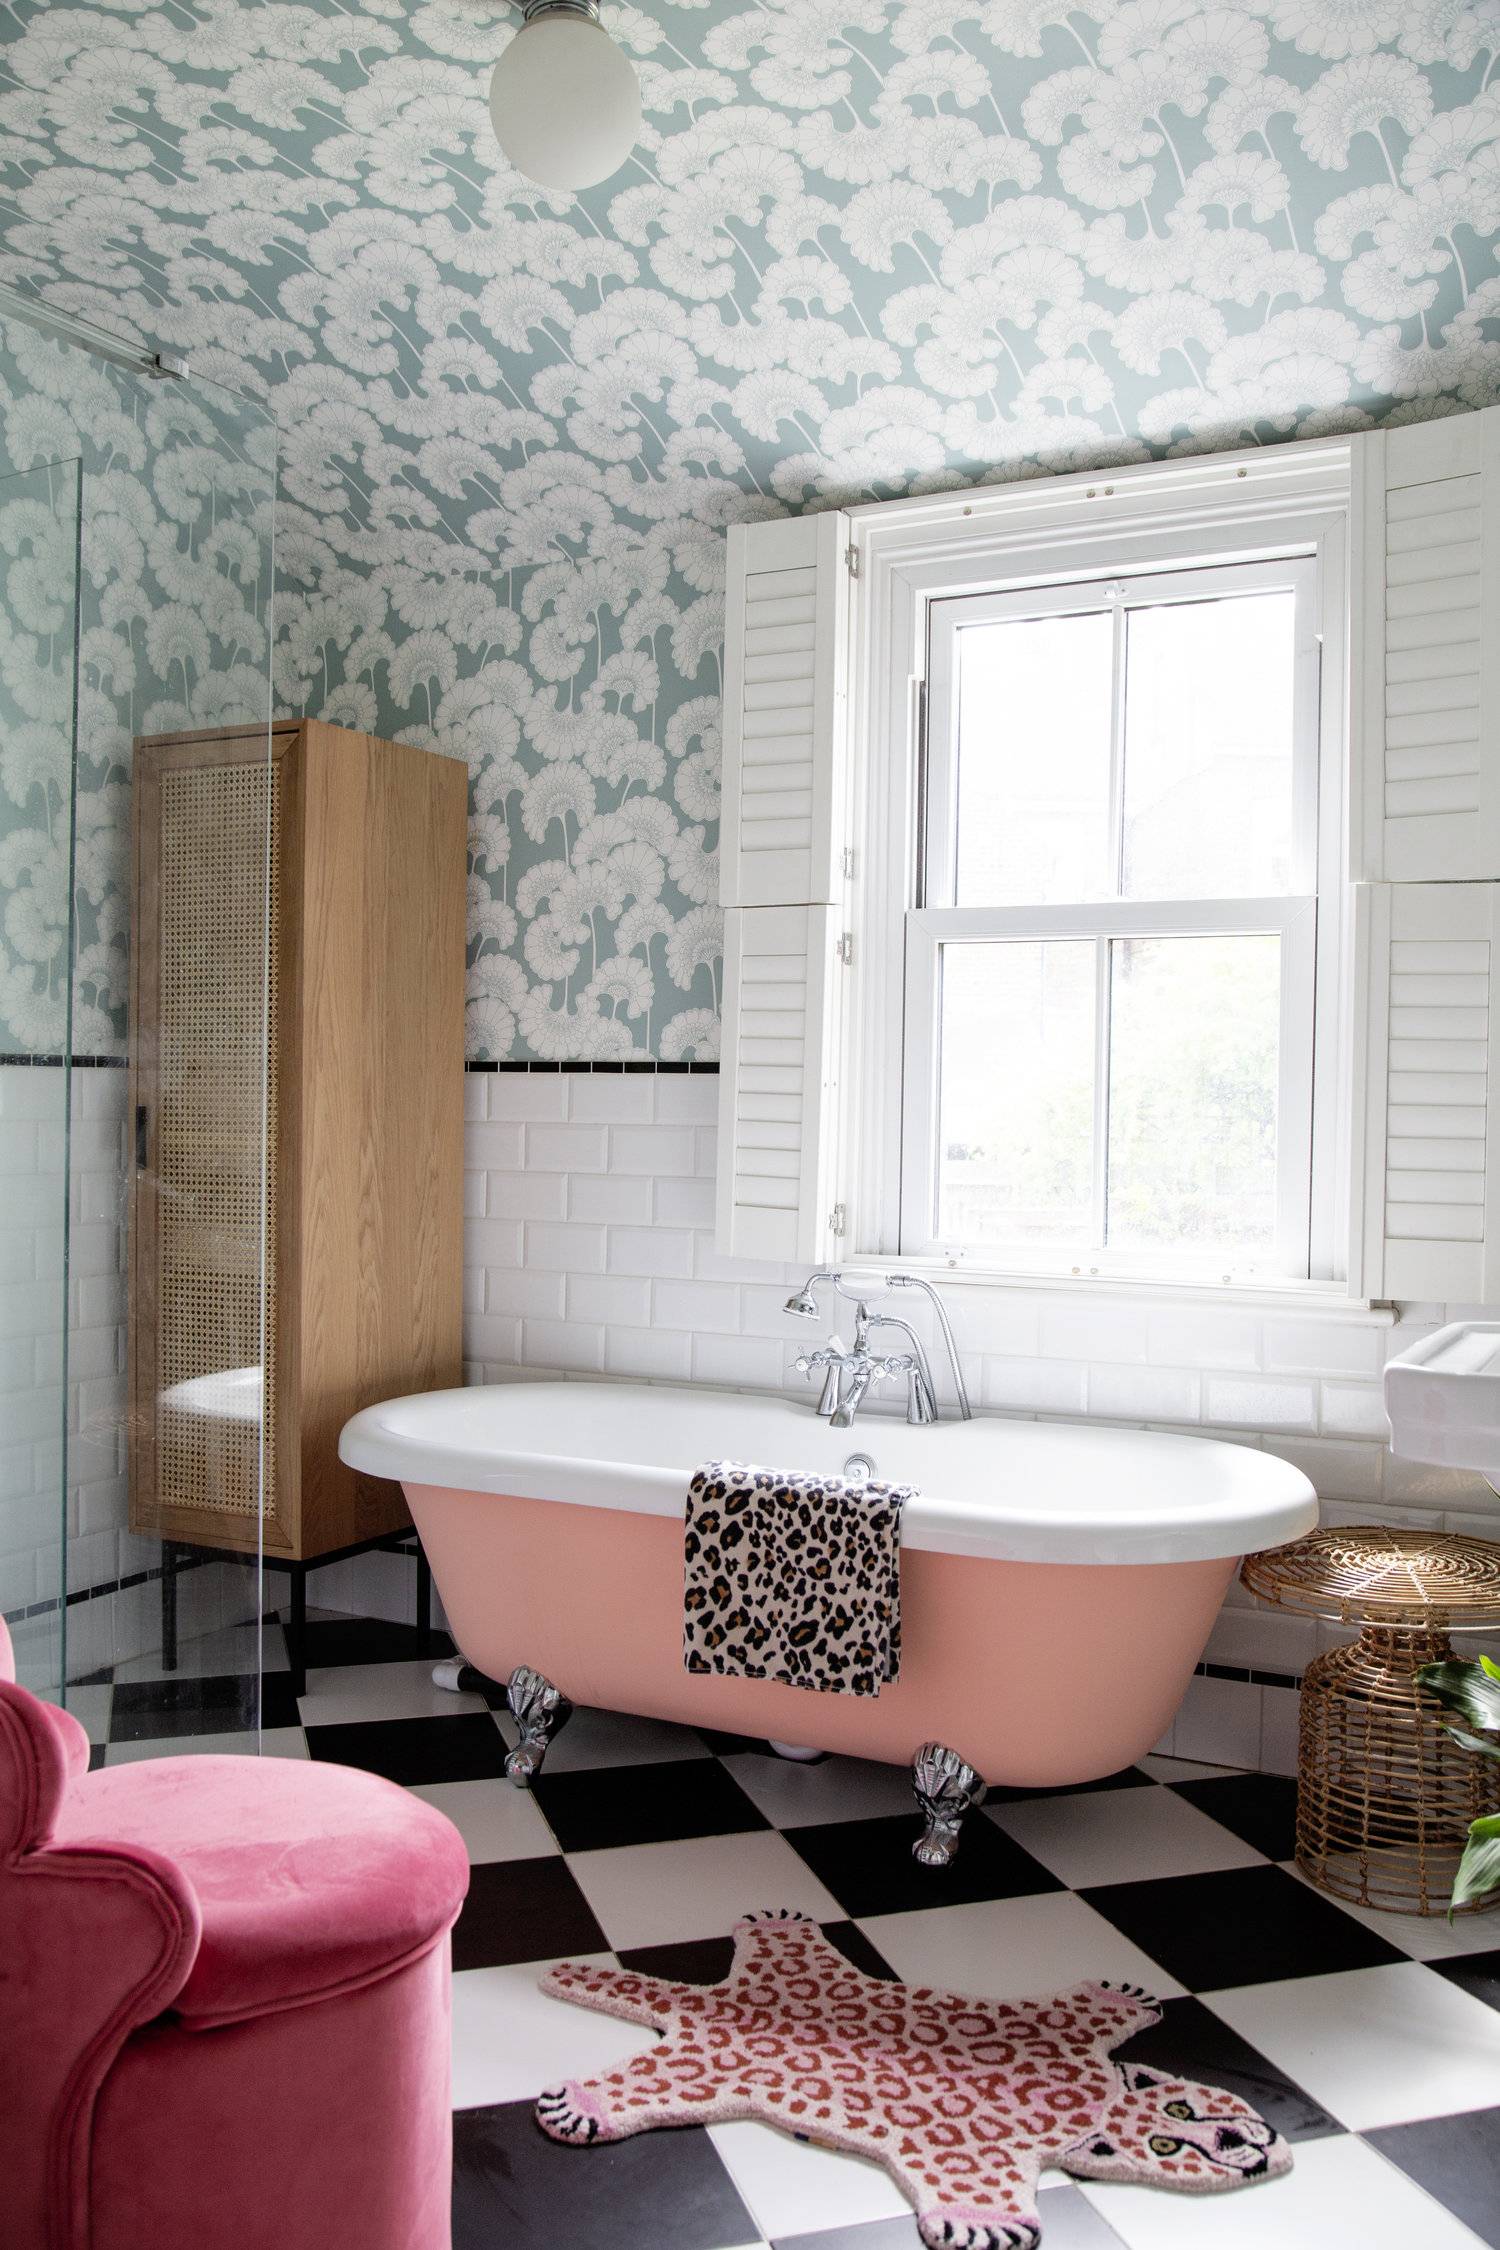 bathroom with turquoise and white wave wallpaper, pink bathtub, leopard print accents, white wooden window shutters